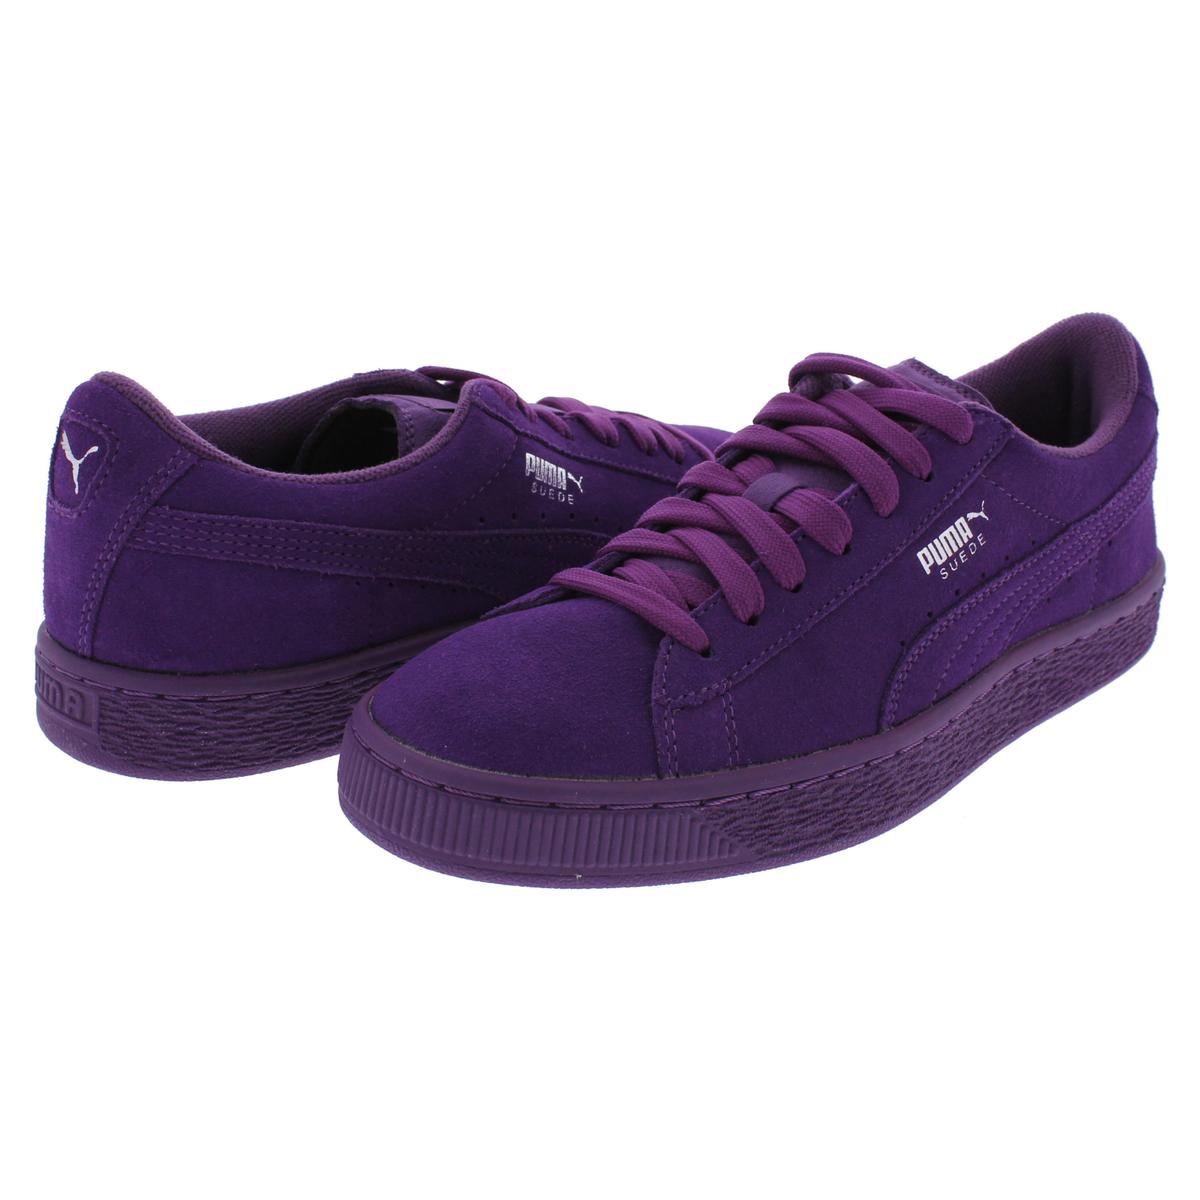 Puma Girls Suede Jr Suede Low Top Casual Shoes - image 3 of 4